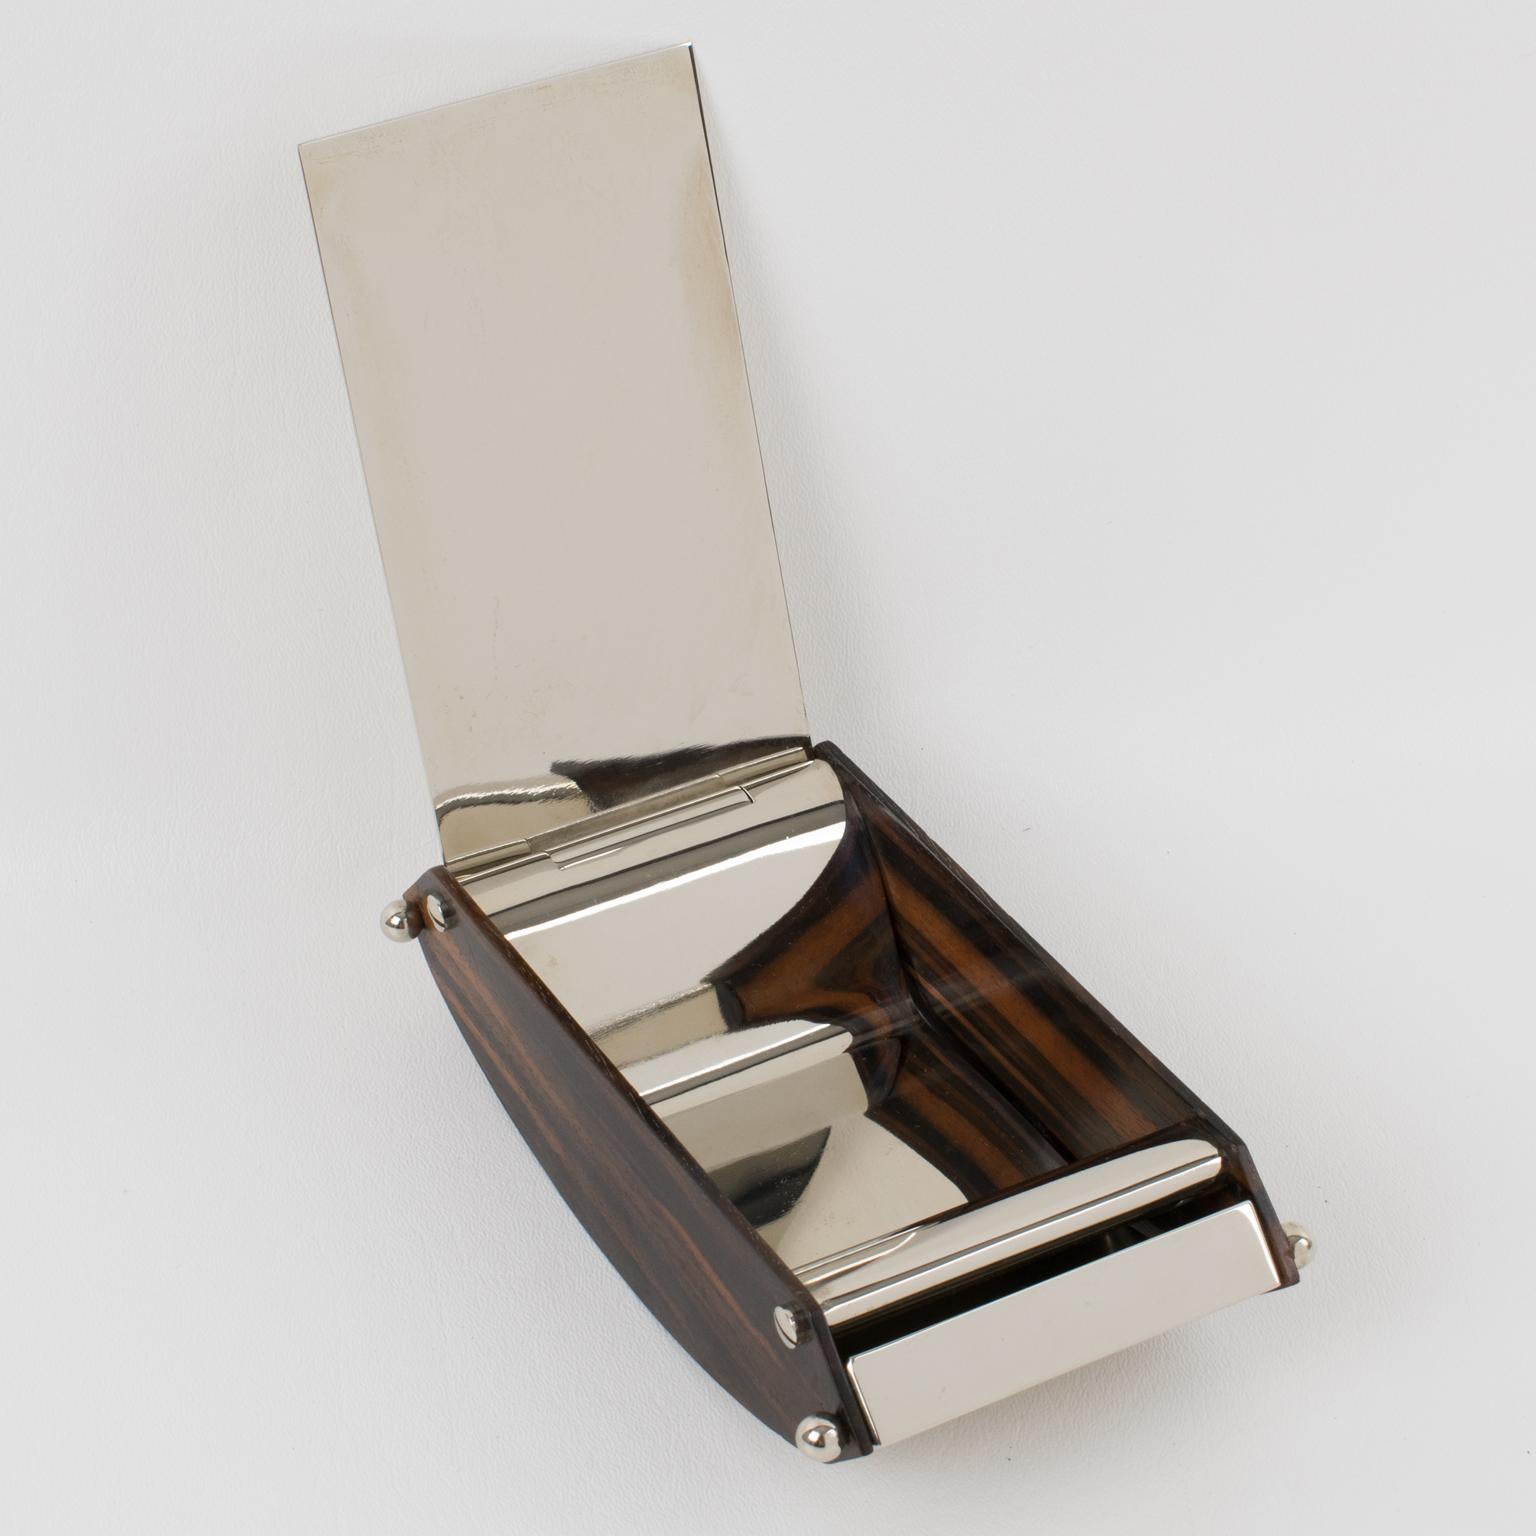 Maison Desny Style Art Deco Macassar Wood and Chrome Metal Box, 1930s In Excellent Condition For Sale In Atlanta, GA